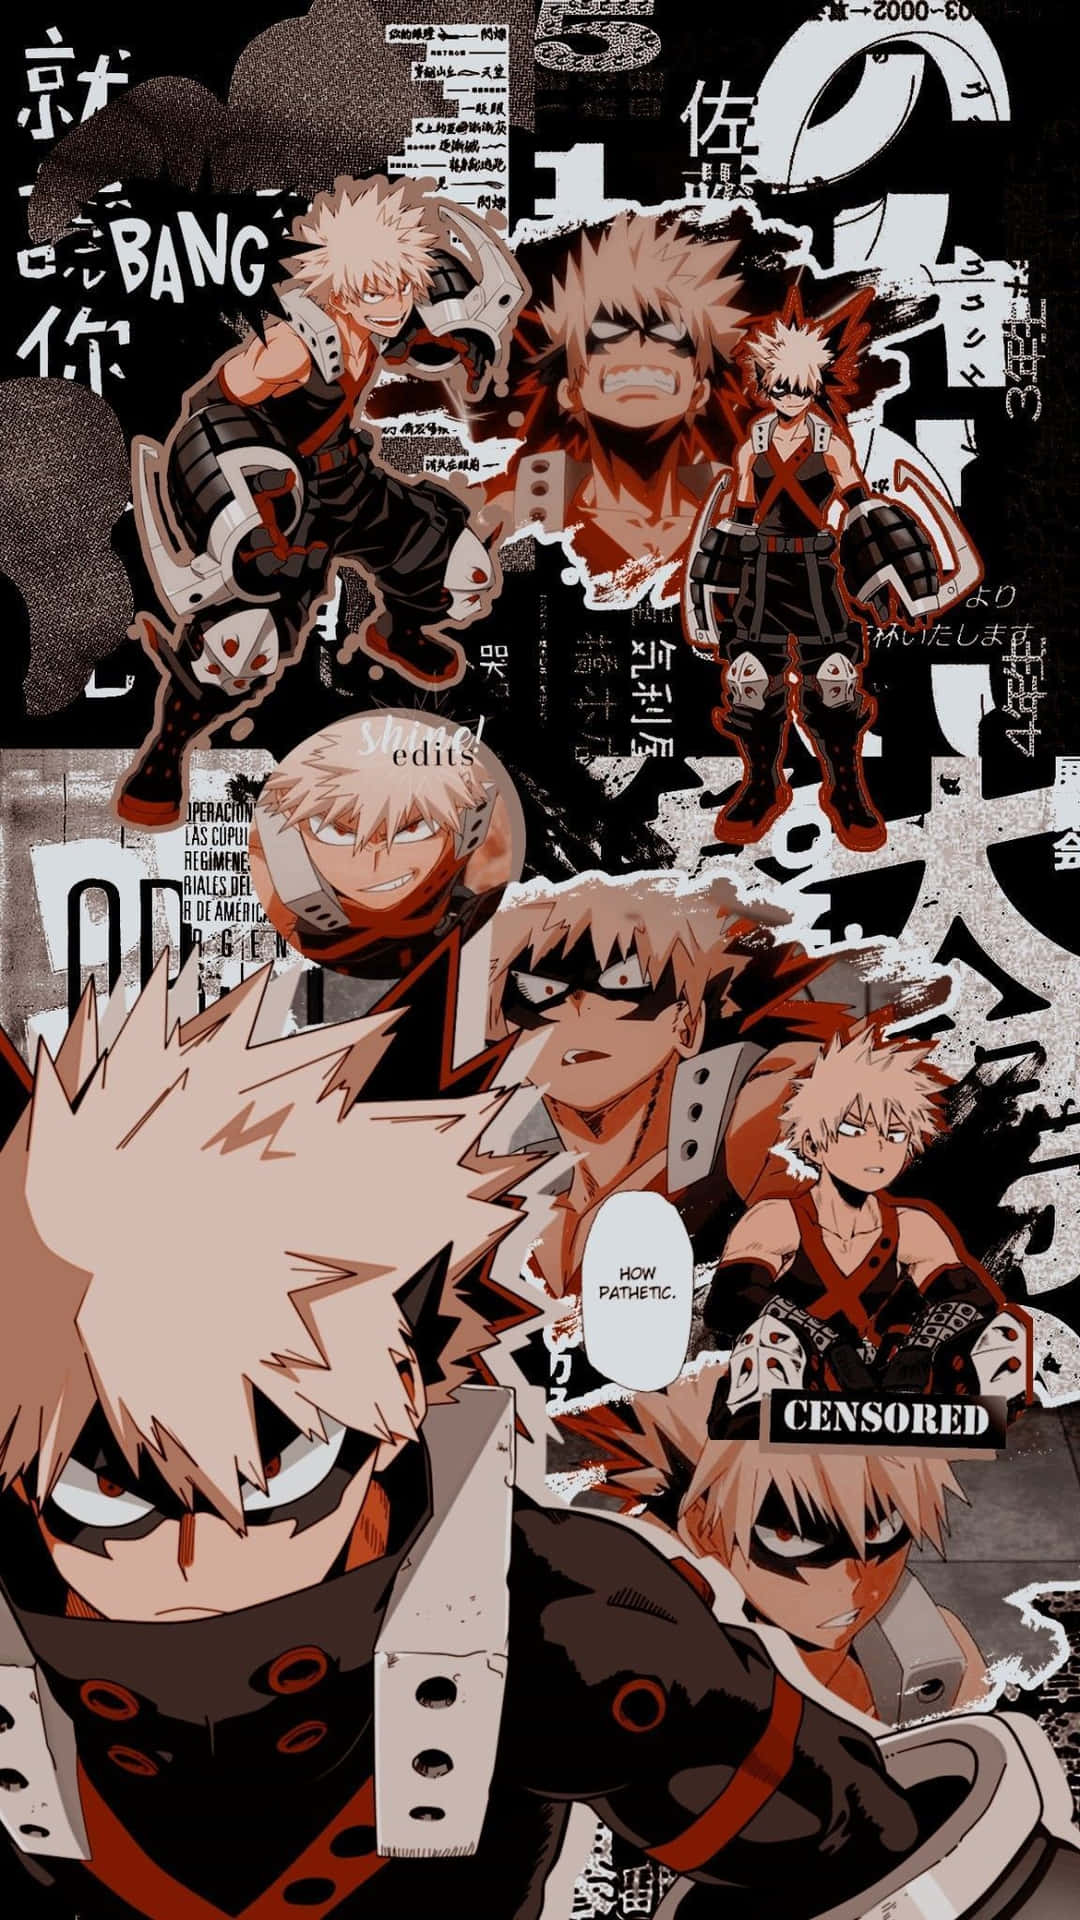 Bakugou - The Symbol Of Power And Confidence Background